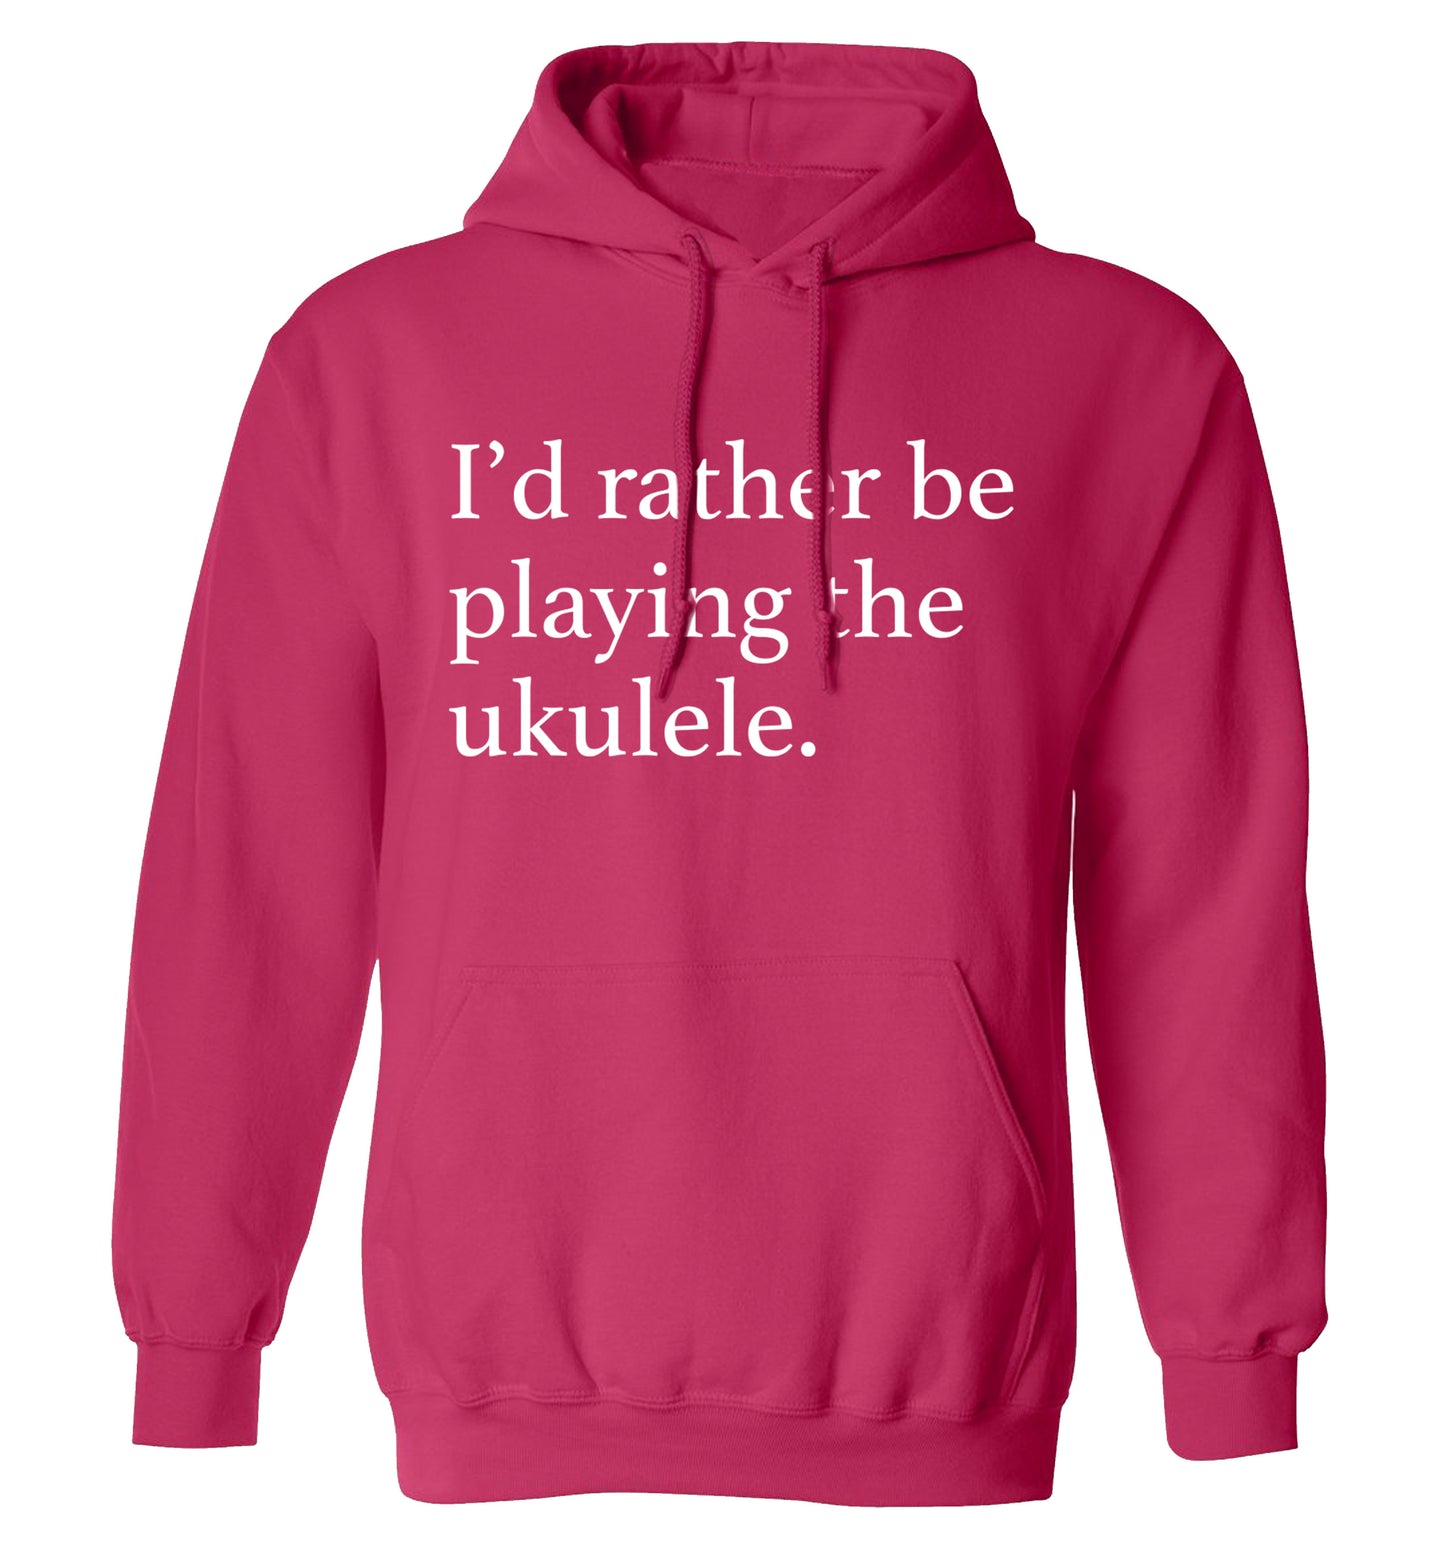 I'd rather by playing the ukulele adults unisex pink hoodie 2XL